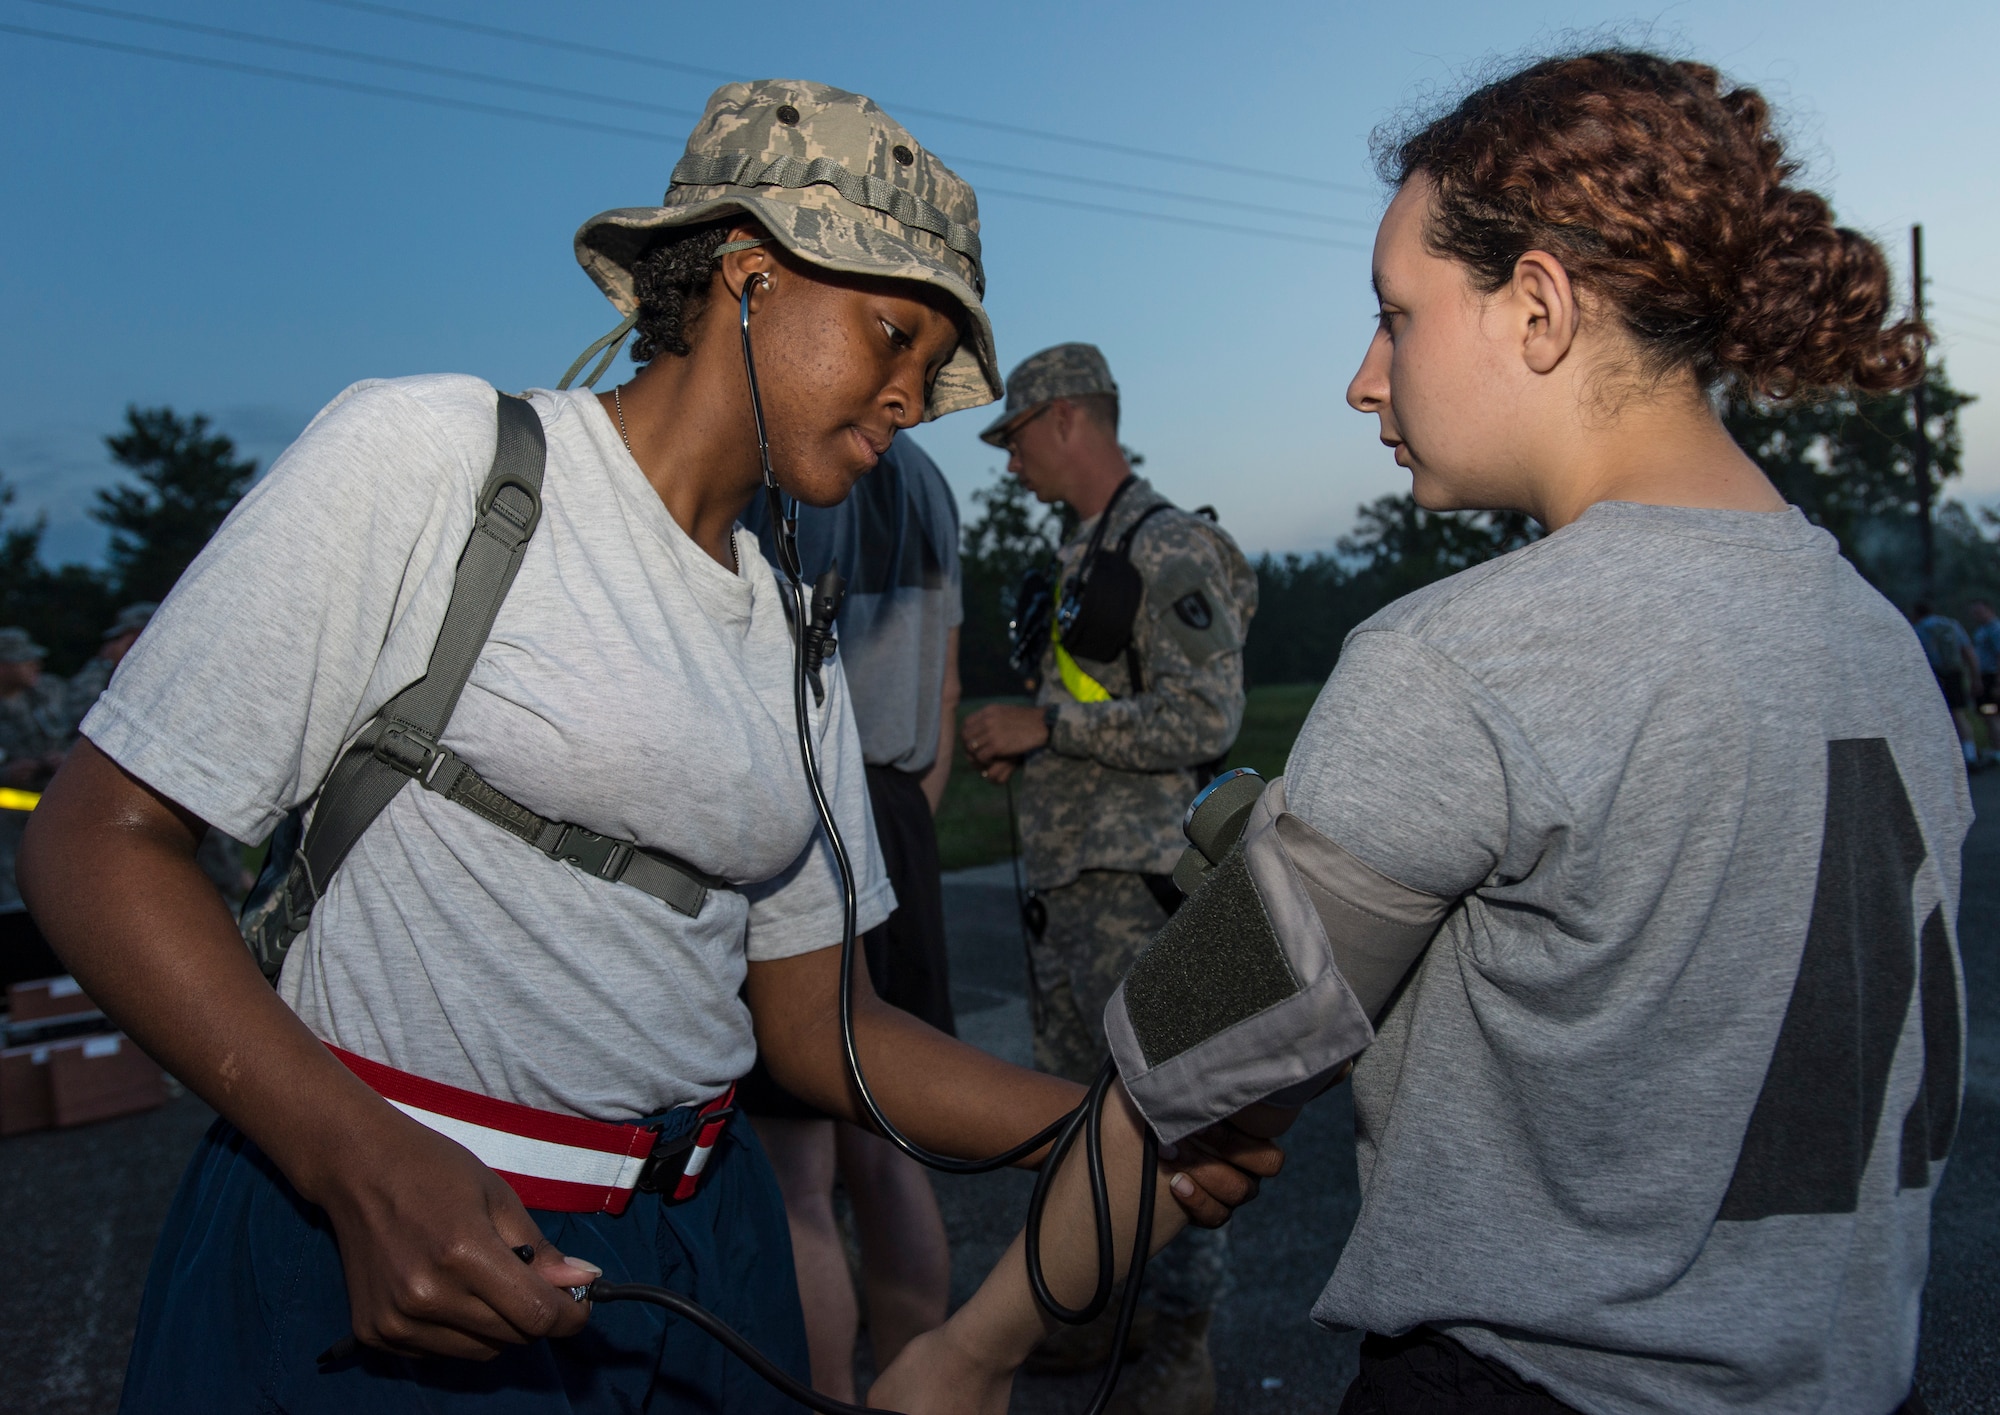 U.S. Air Force Airman 1st Class Jasmine Mitchell, a medical technician with the 116th Medical Group, Georgia Air National Guard, checks the blood pressure of Cpl. Marcerra Jordon, a chemical specialist with the 138th Chemical Company, Georgia National Guard, to ensure she is safe to participate in the day’s events during the Vigilant Guard 2013 exercise at Camp Blanding, Fla., May 21, 2013. The Medical Group from the 116th Air Control Wing, out of Robins Air Force Base, Ga., is a key component of the 78th Homeland Response Force set up to respond to disasters in the Southeast U.S. region. During the exercise, Guardsmen responded to various scenarios such as a plane crash, train derailment, hurricane, and an explosion at a chemical plant. (U.S. Air National Guard photo by Master Sgt. Roger Parsons/Released)